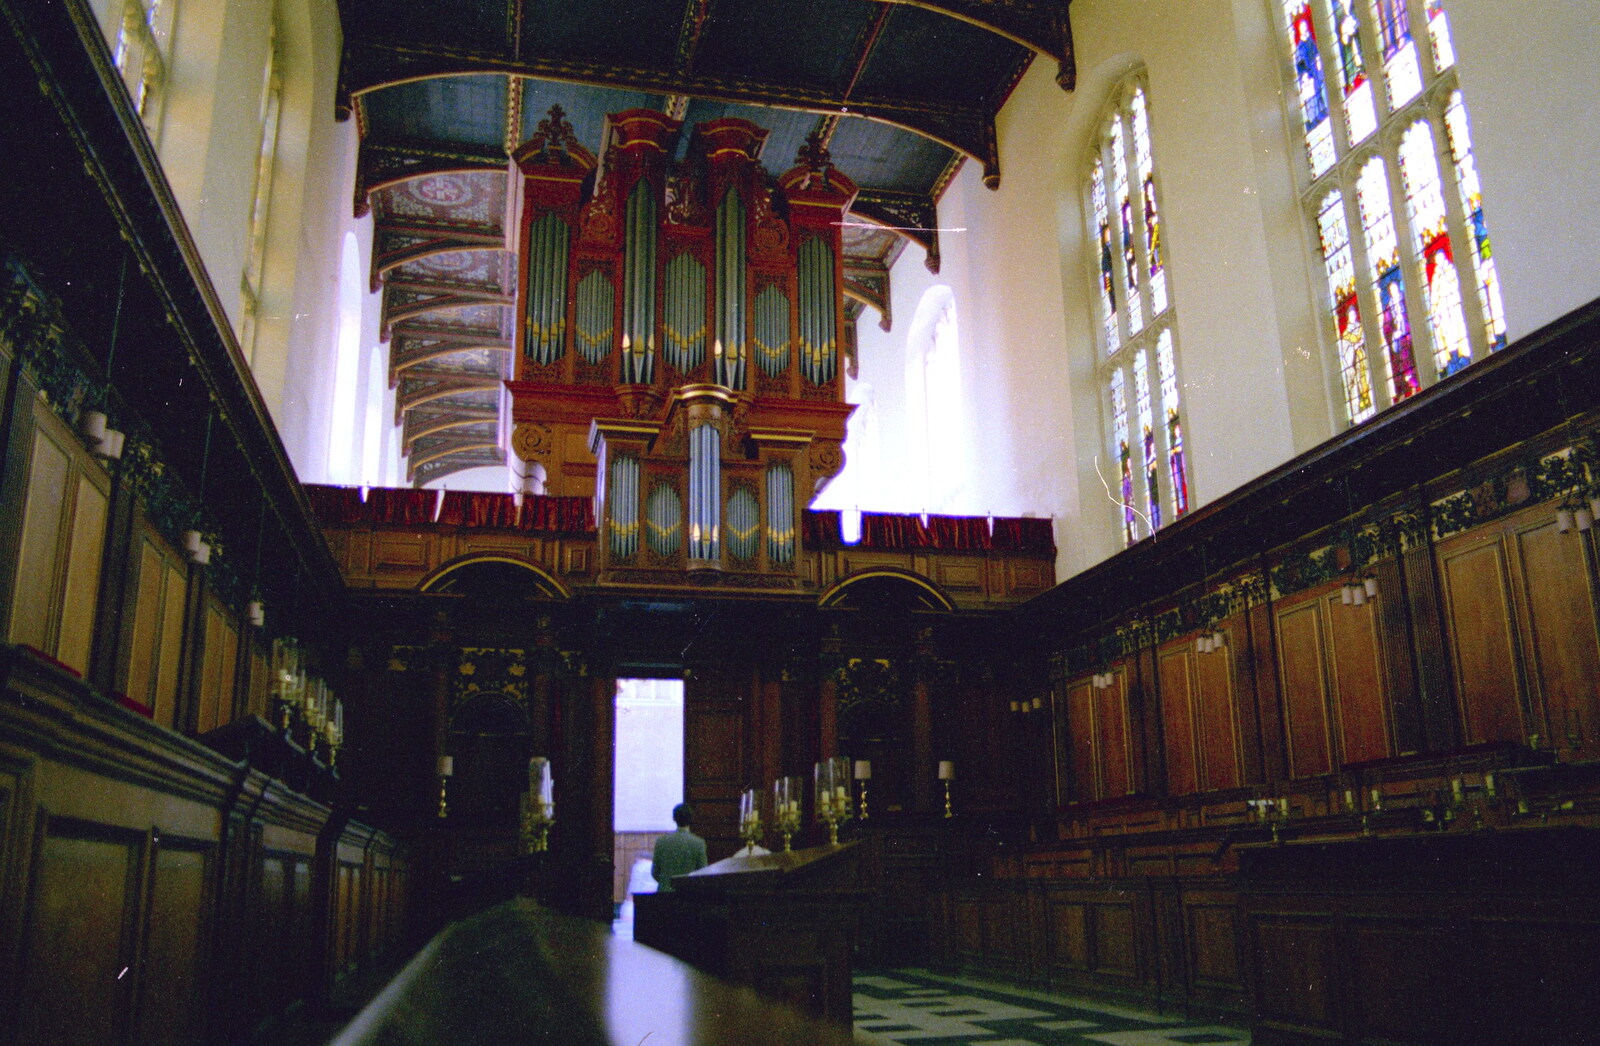 Trinity Chapel from A Trip to Trinity College, Cambridge - 23rd March 1986